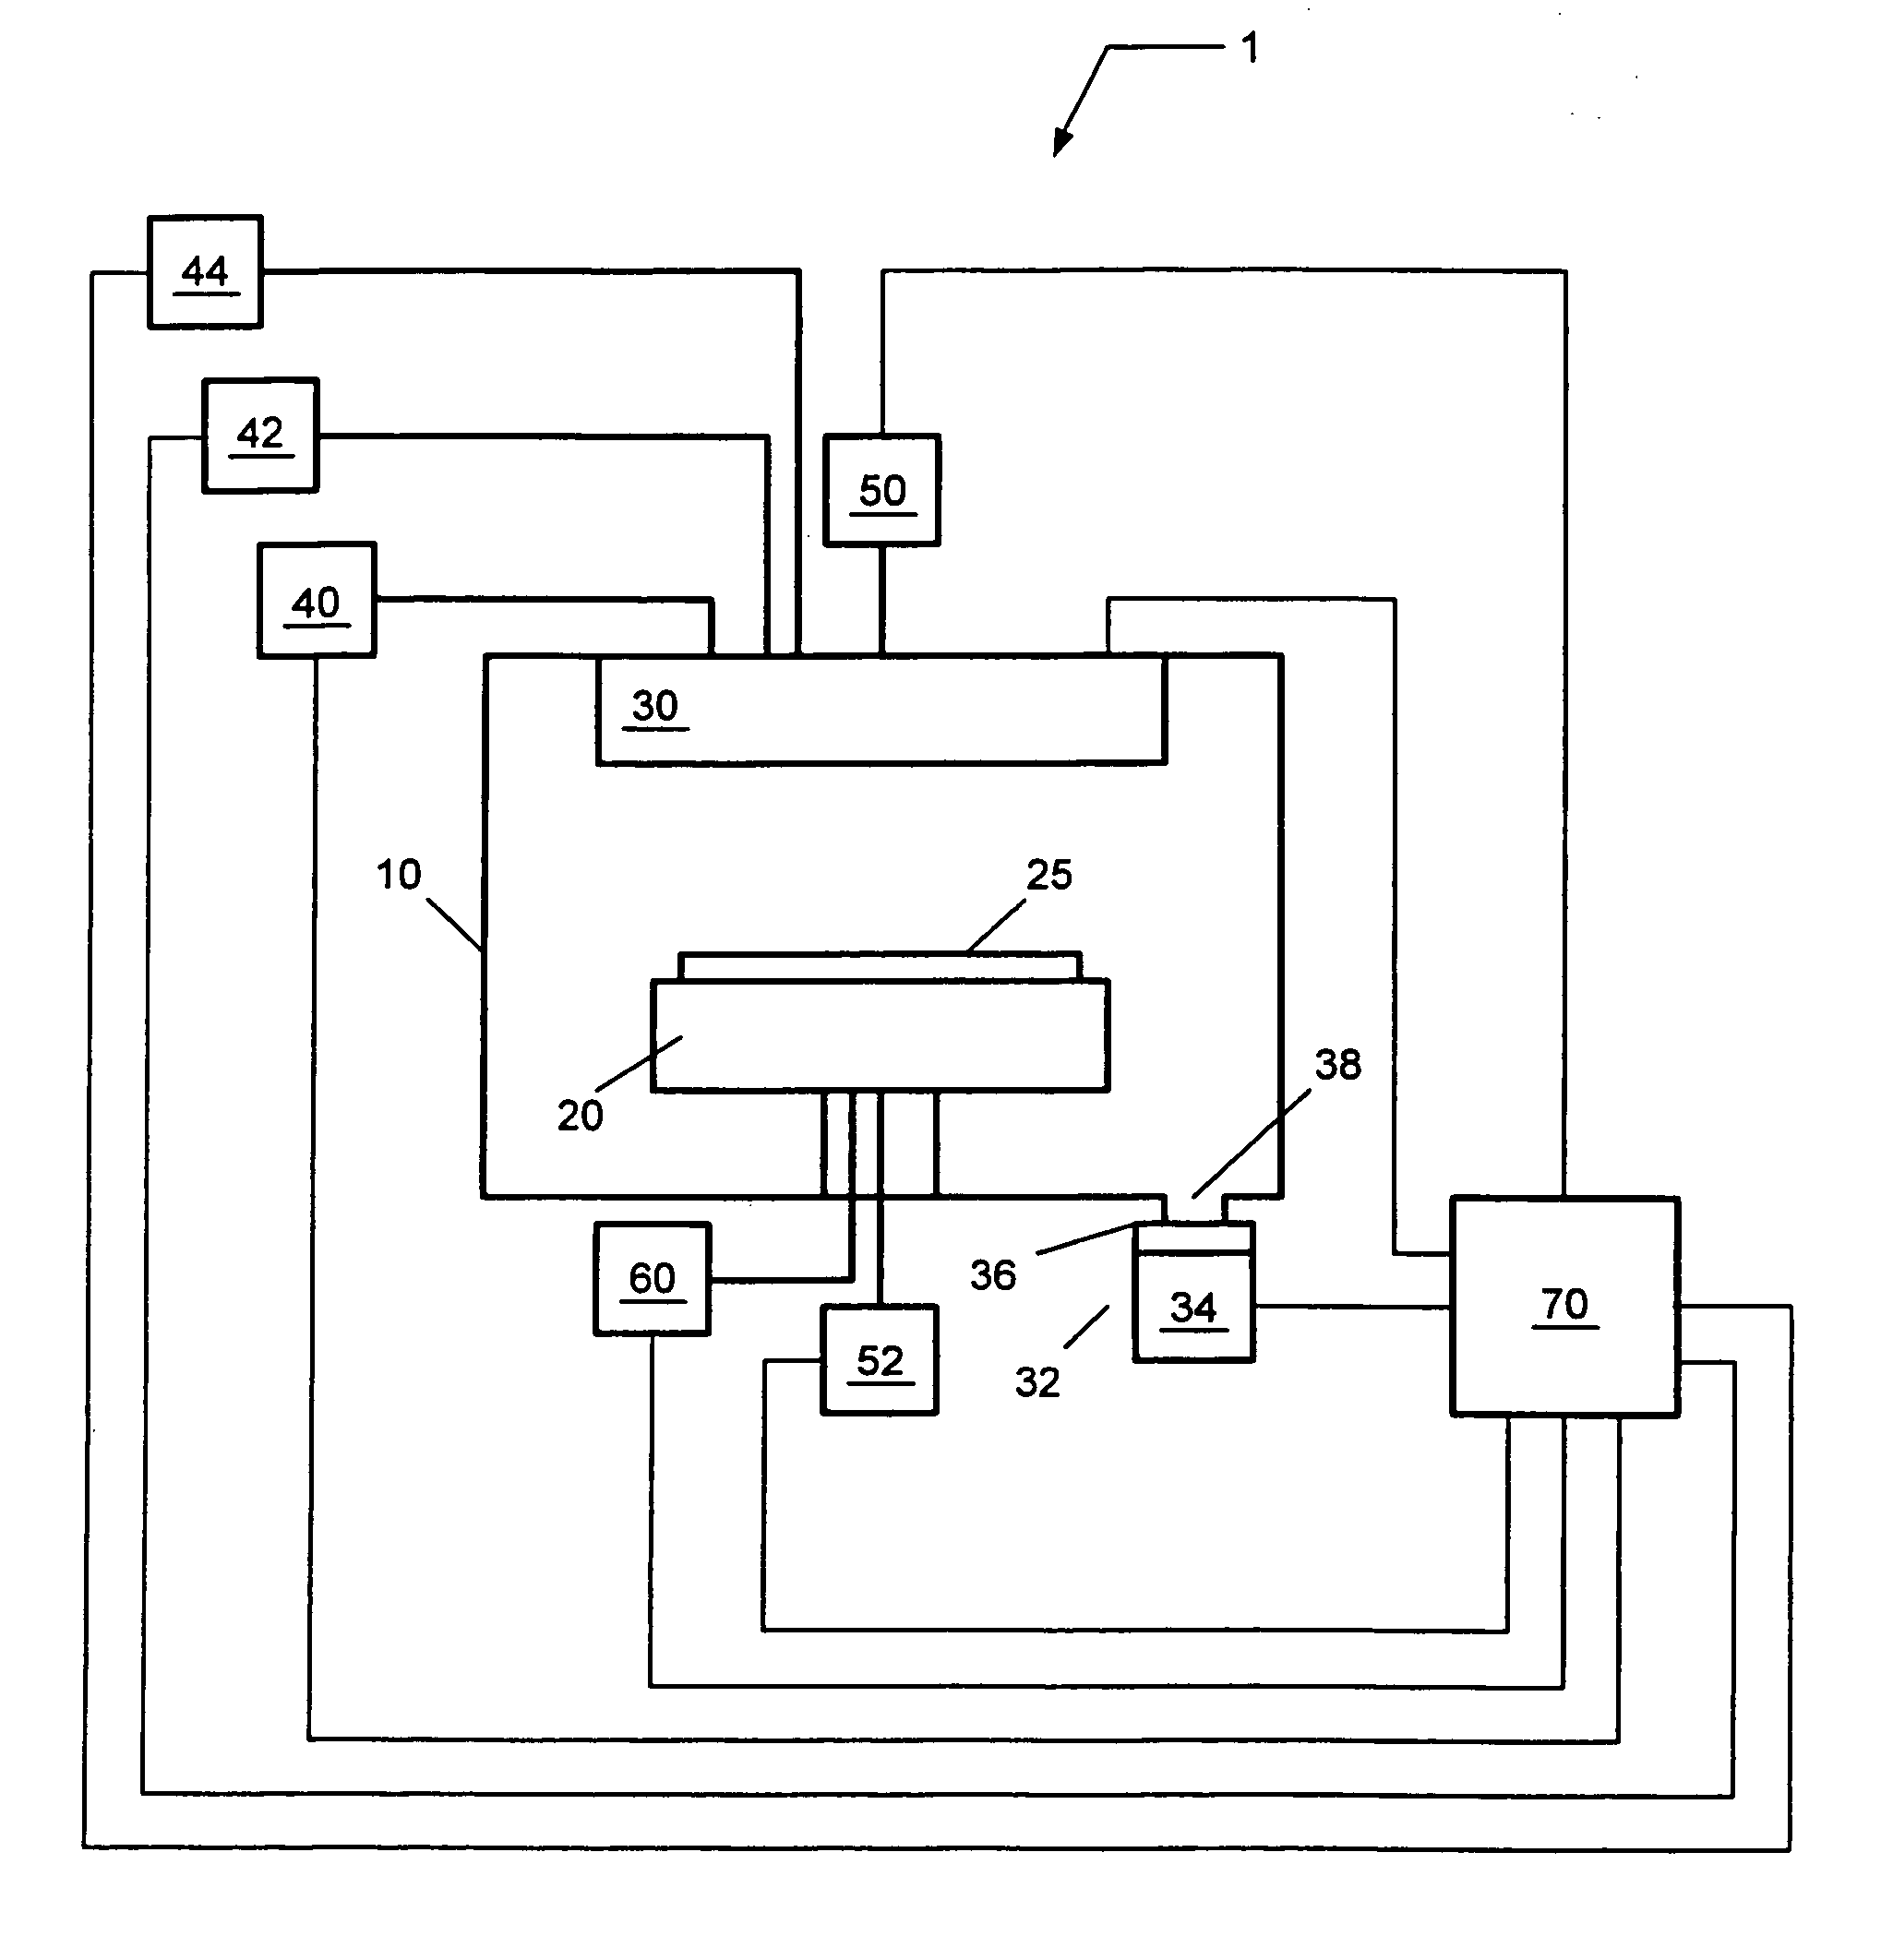 Post deposition plasma cleaning system and method